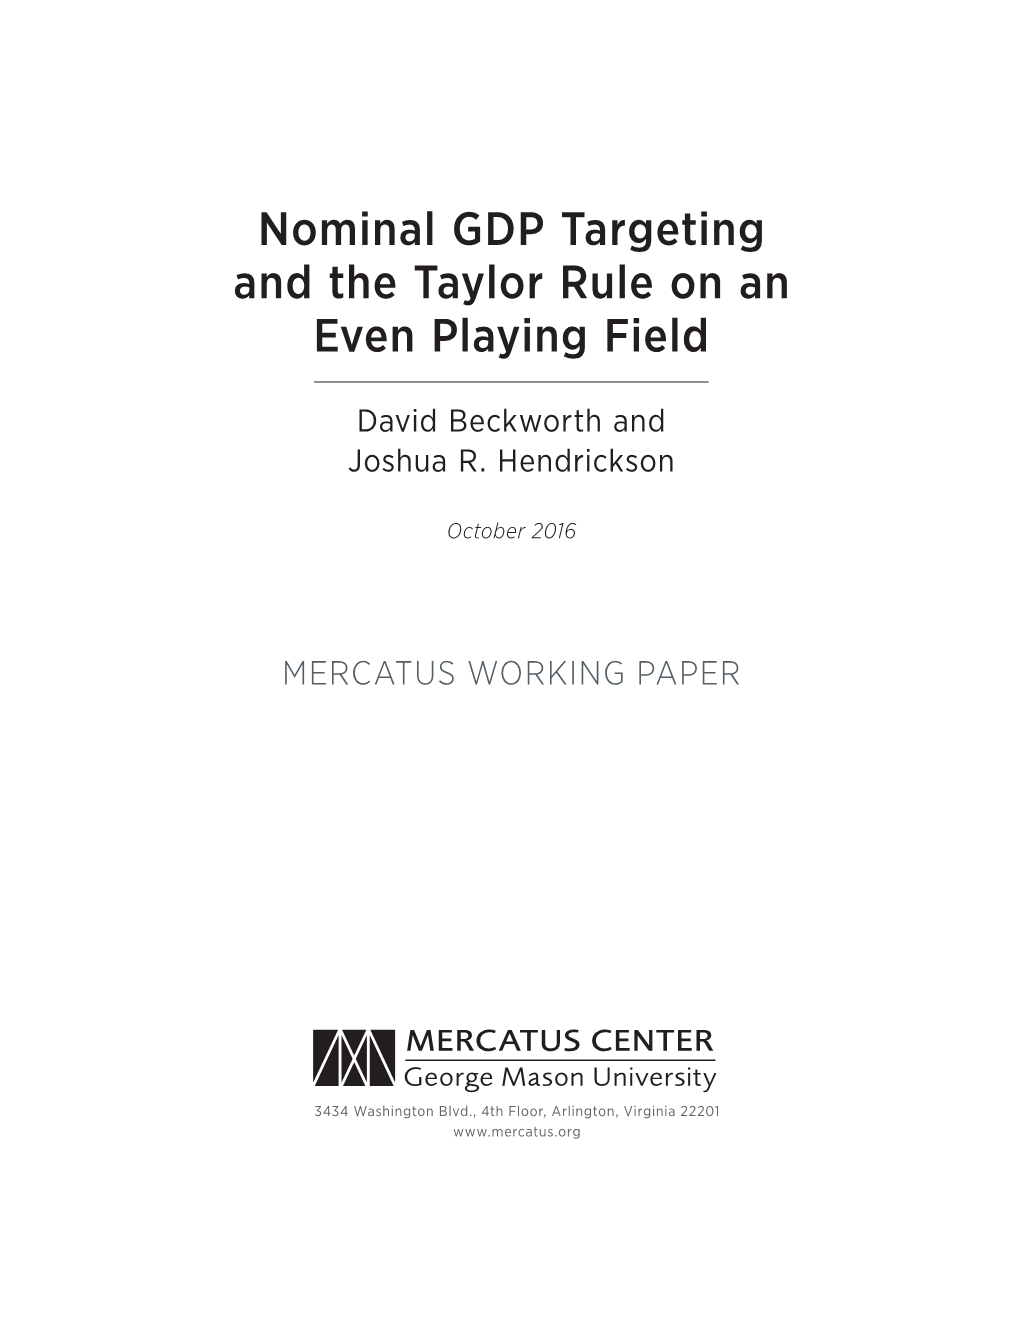 Nominal GDP Targeting and the Taylor Rule on an Even Playing Field